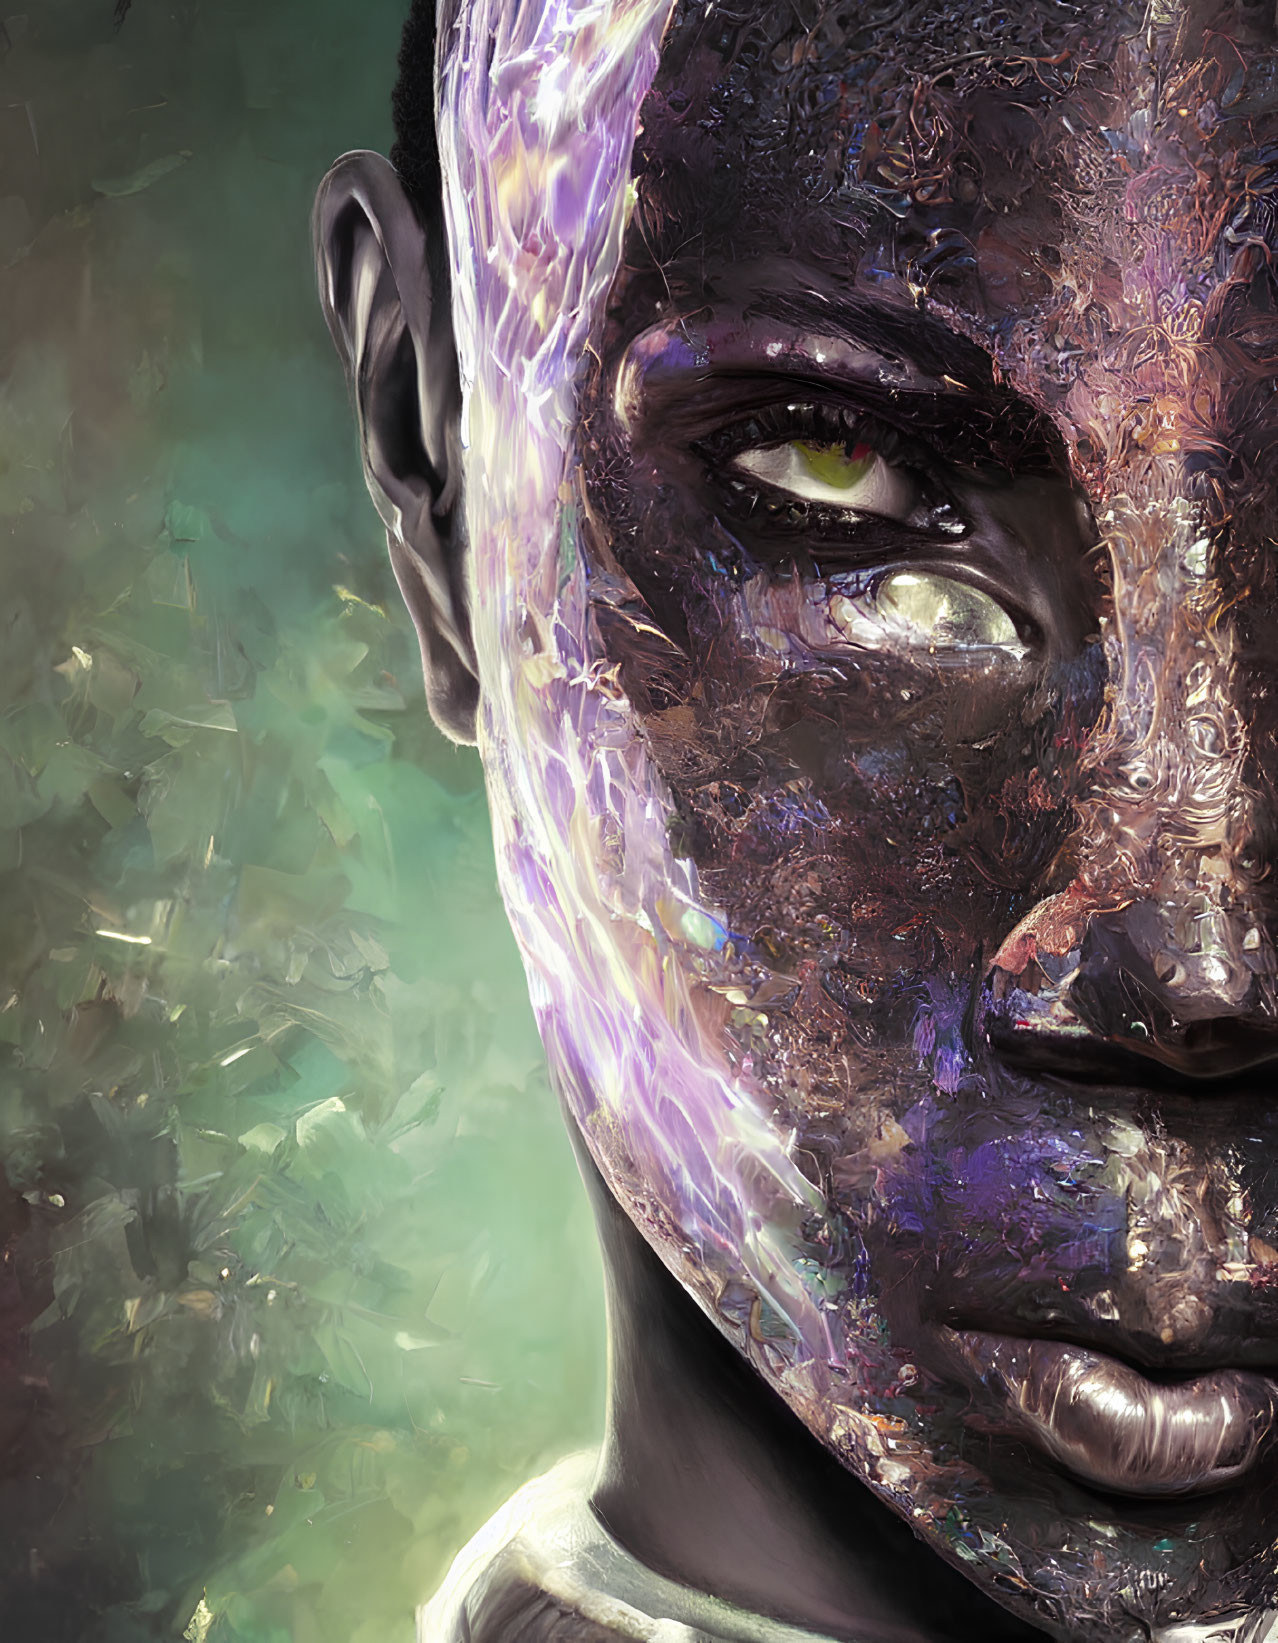 Vivid digital painting of a face with fracturing textures and intense gaze